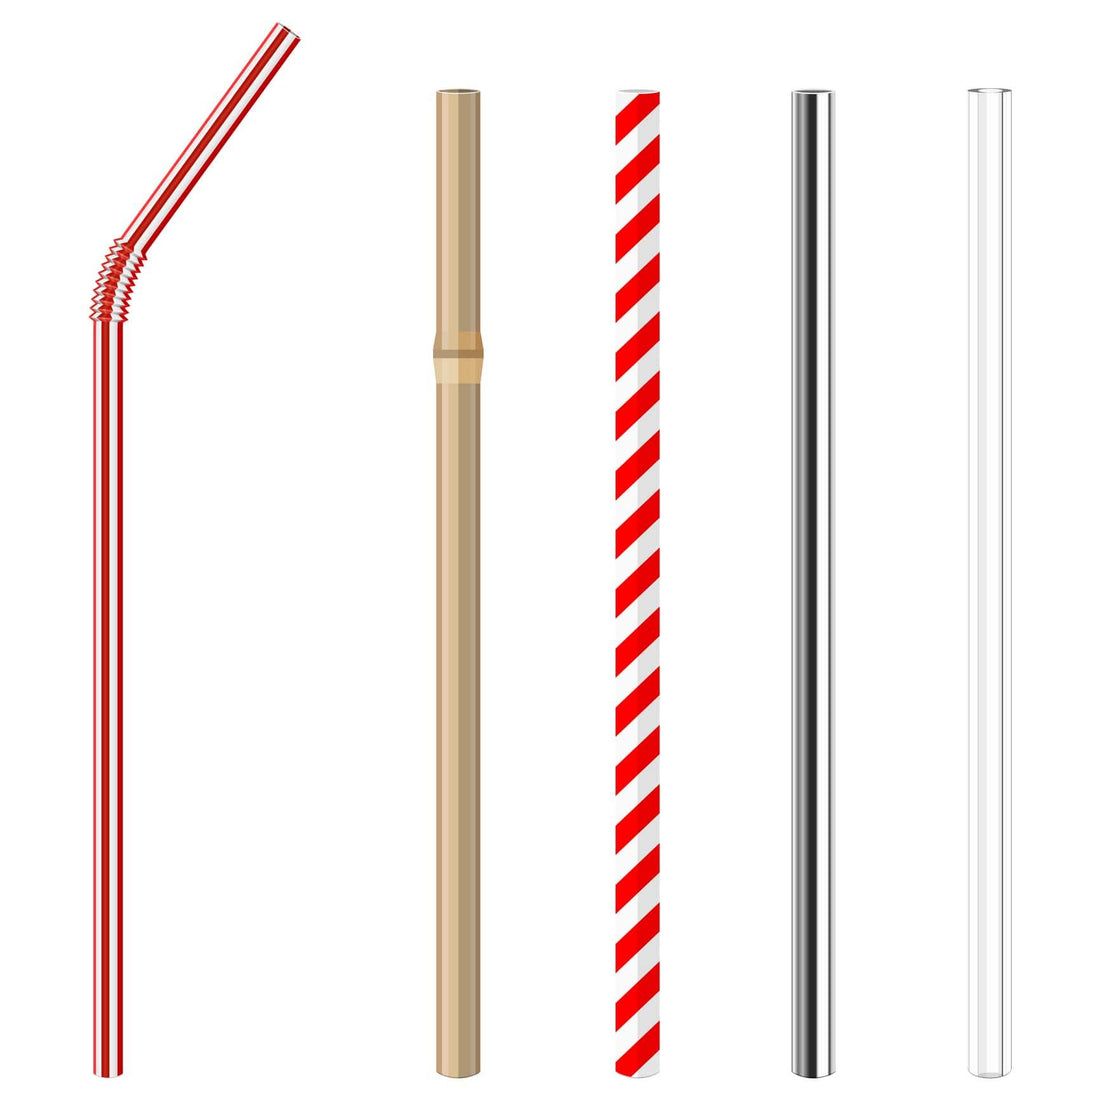 History of the Plastic Straw